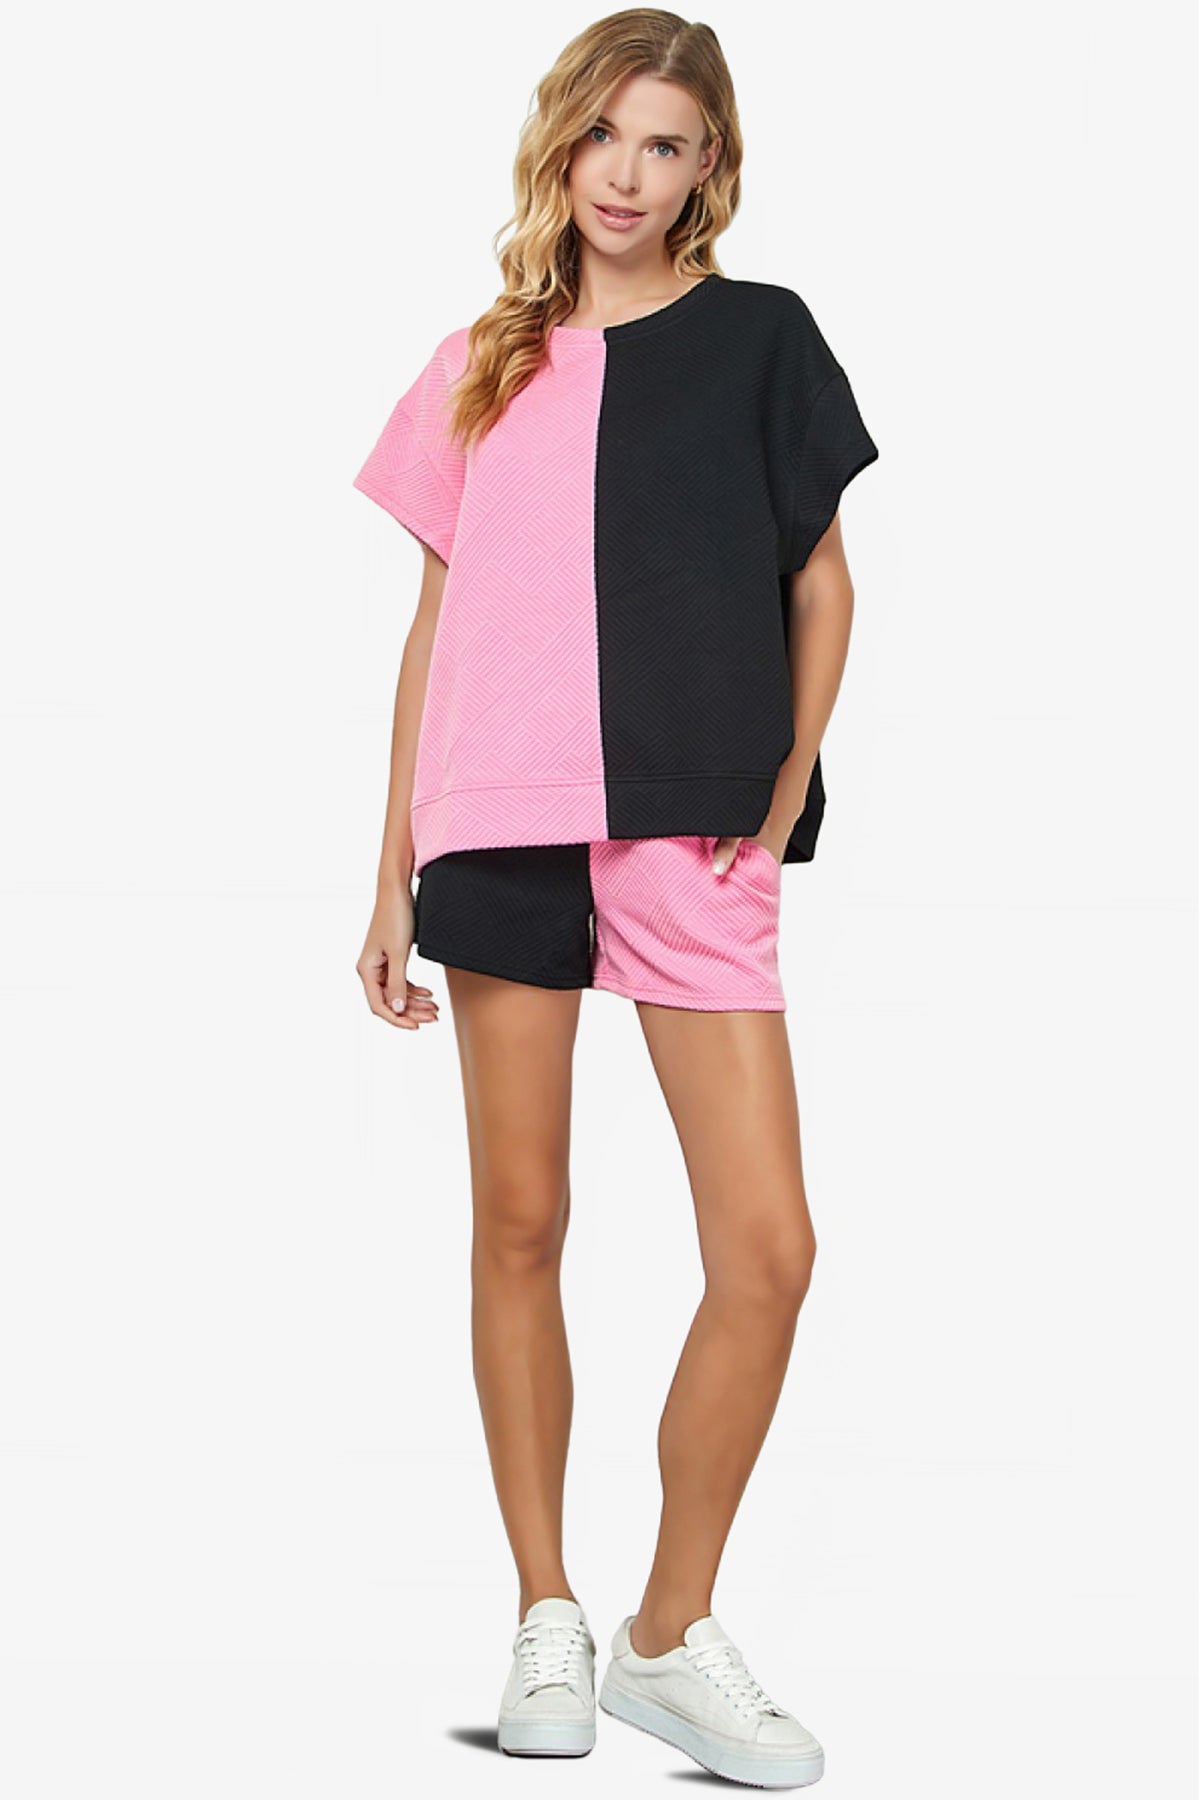 Buy Juicy Couture women colorblock drawstring side pockets shorts black and  pink Online